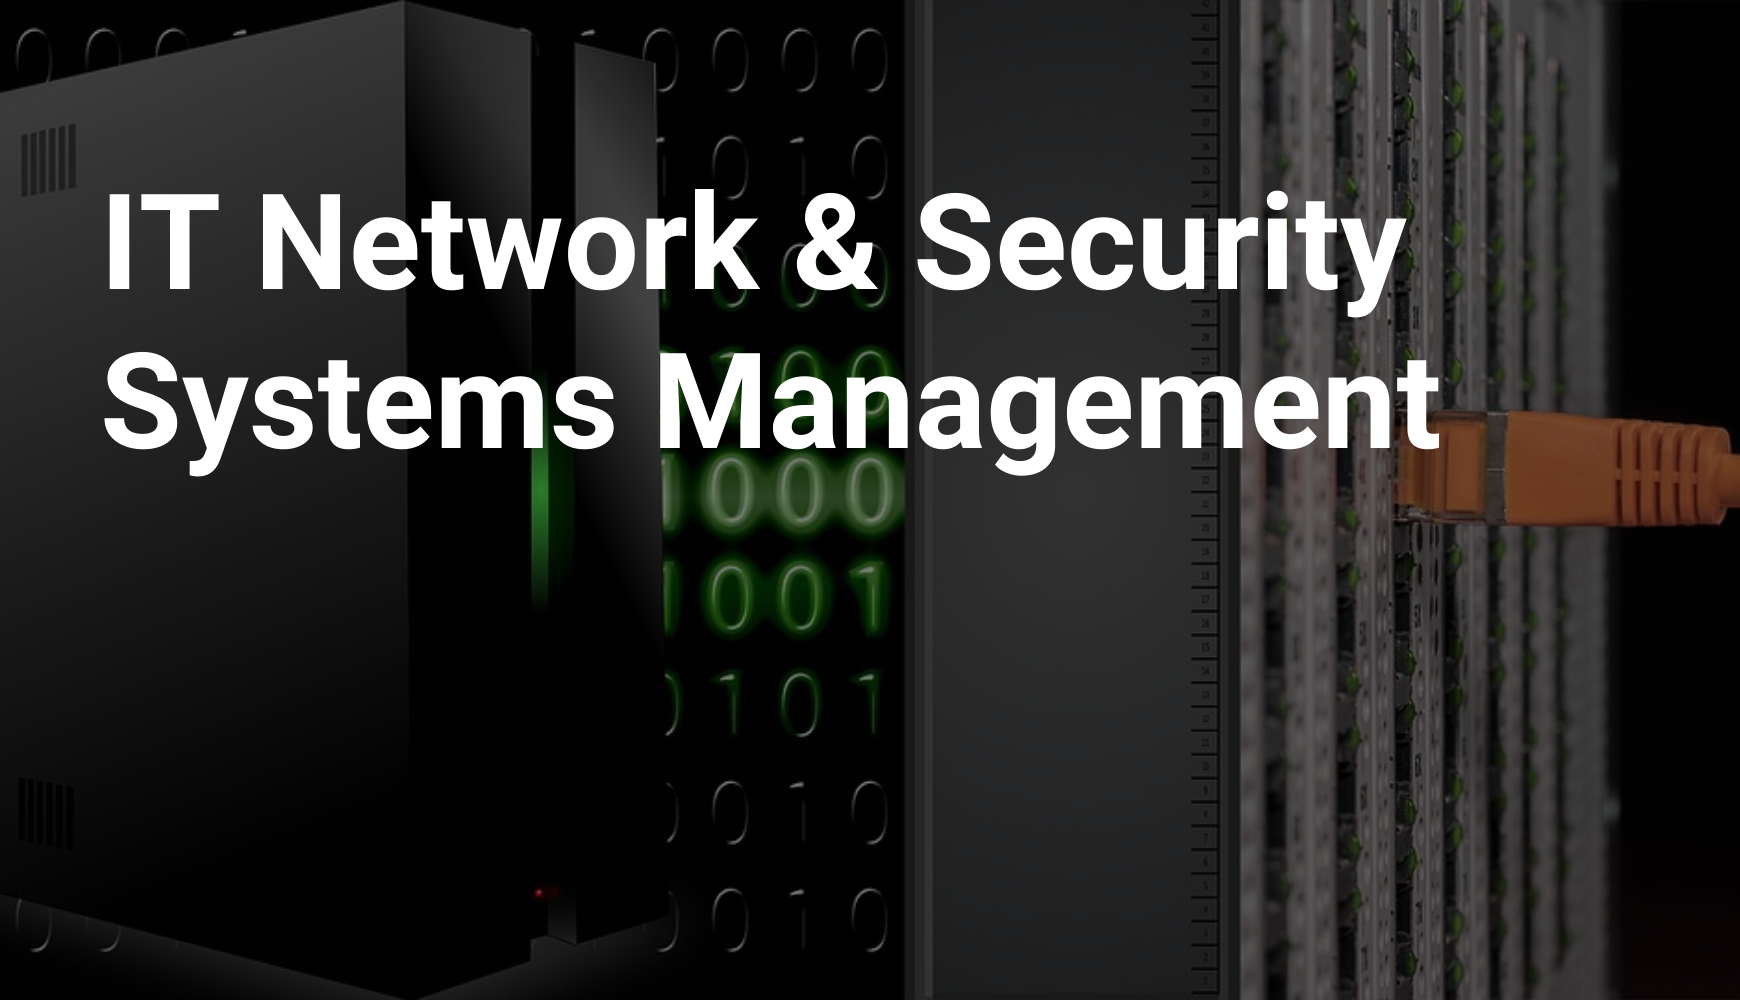 IT Network & Security Systems Management